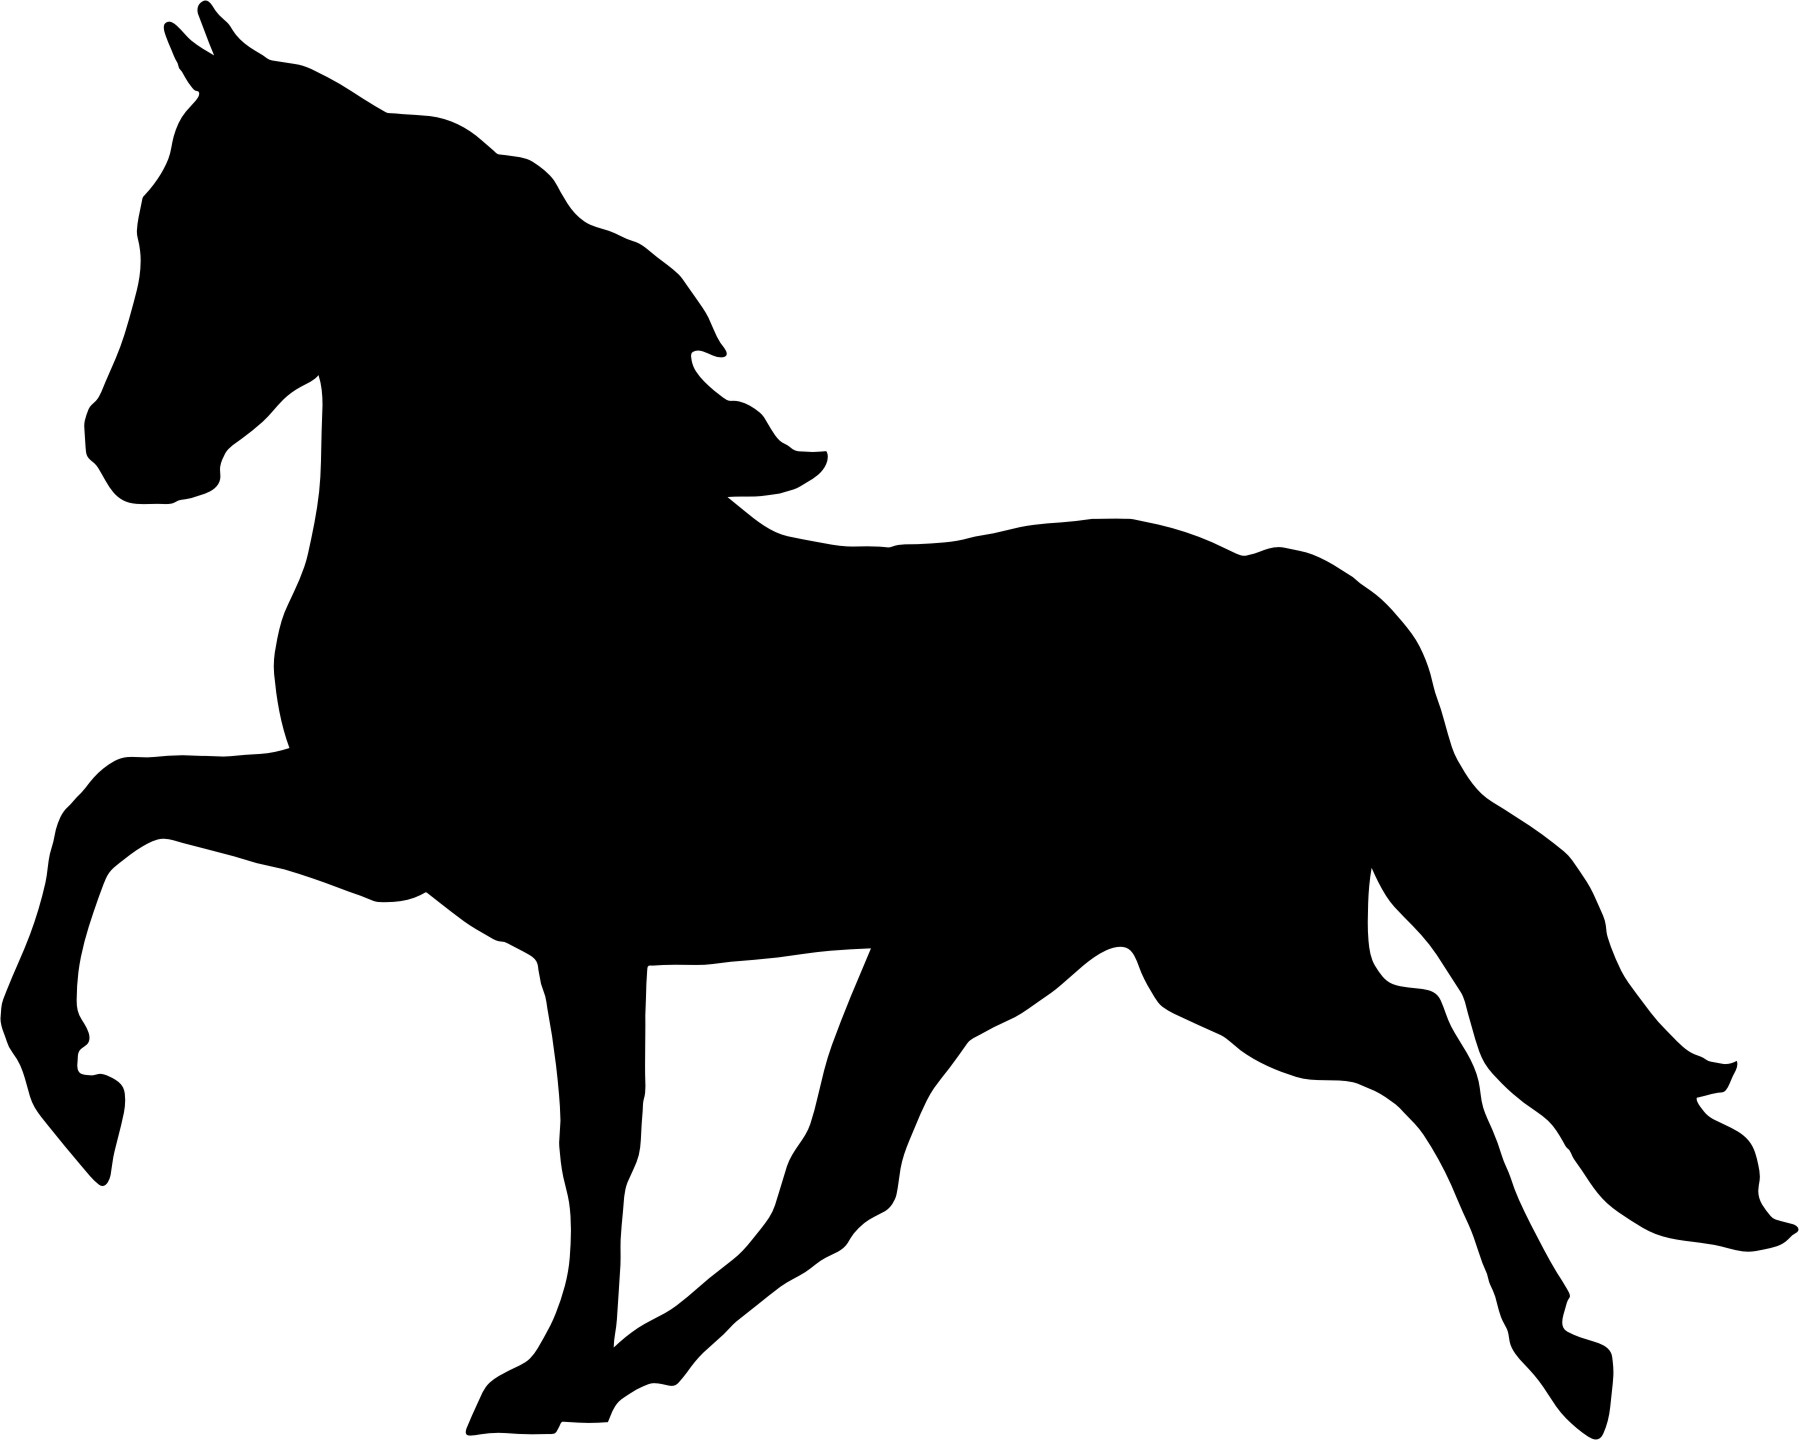 Horse Head Silhouette Images  Pictures - Becuo